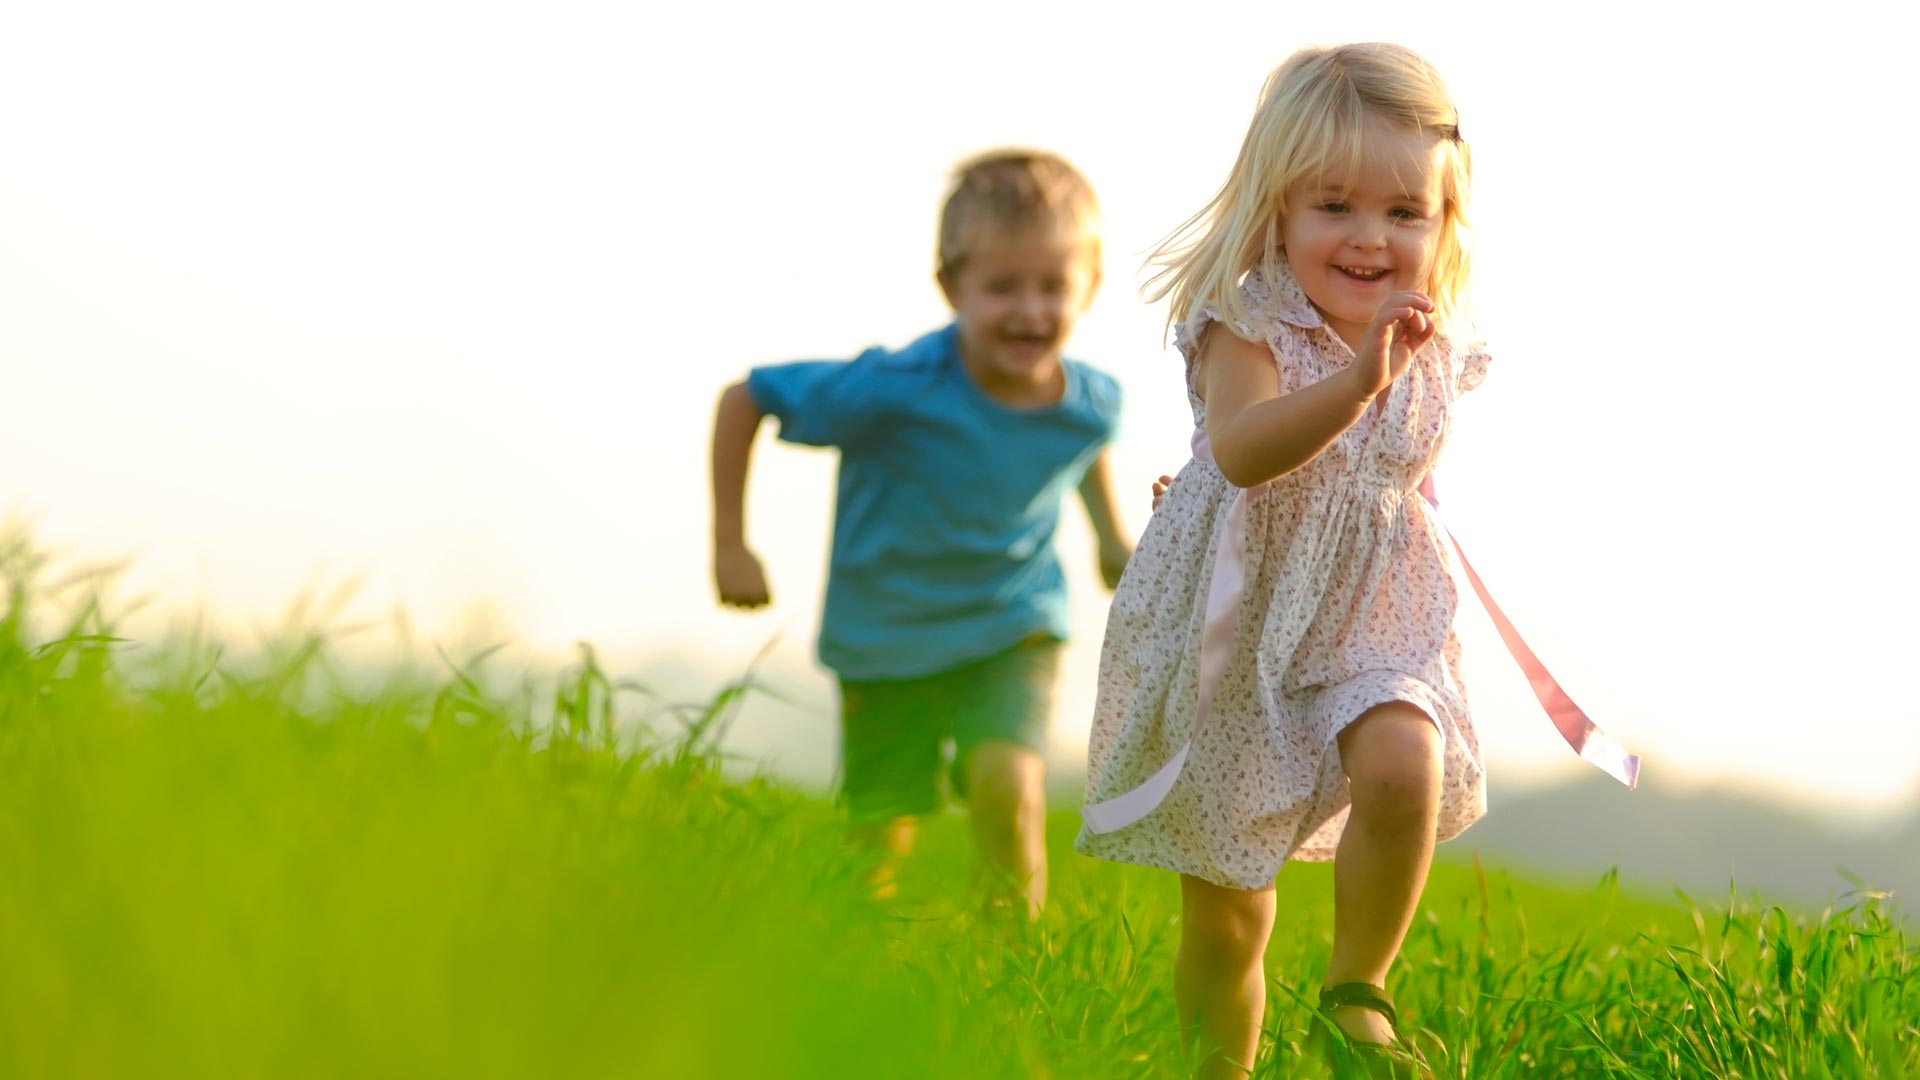 HD Wallpaper Kids Chasing Background For Your